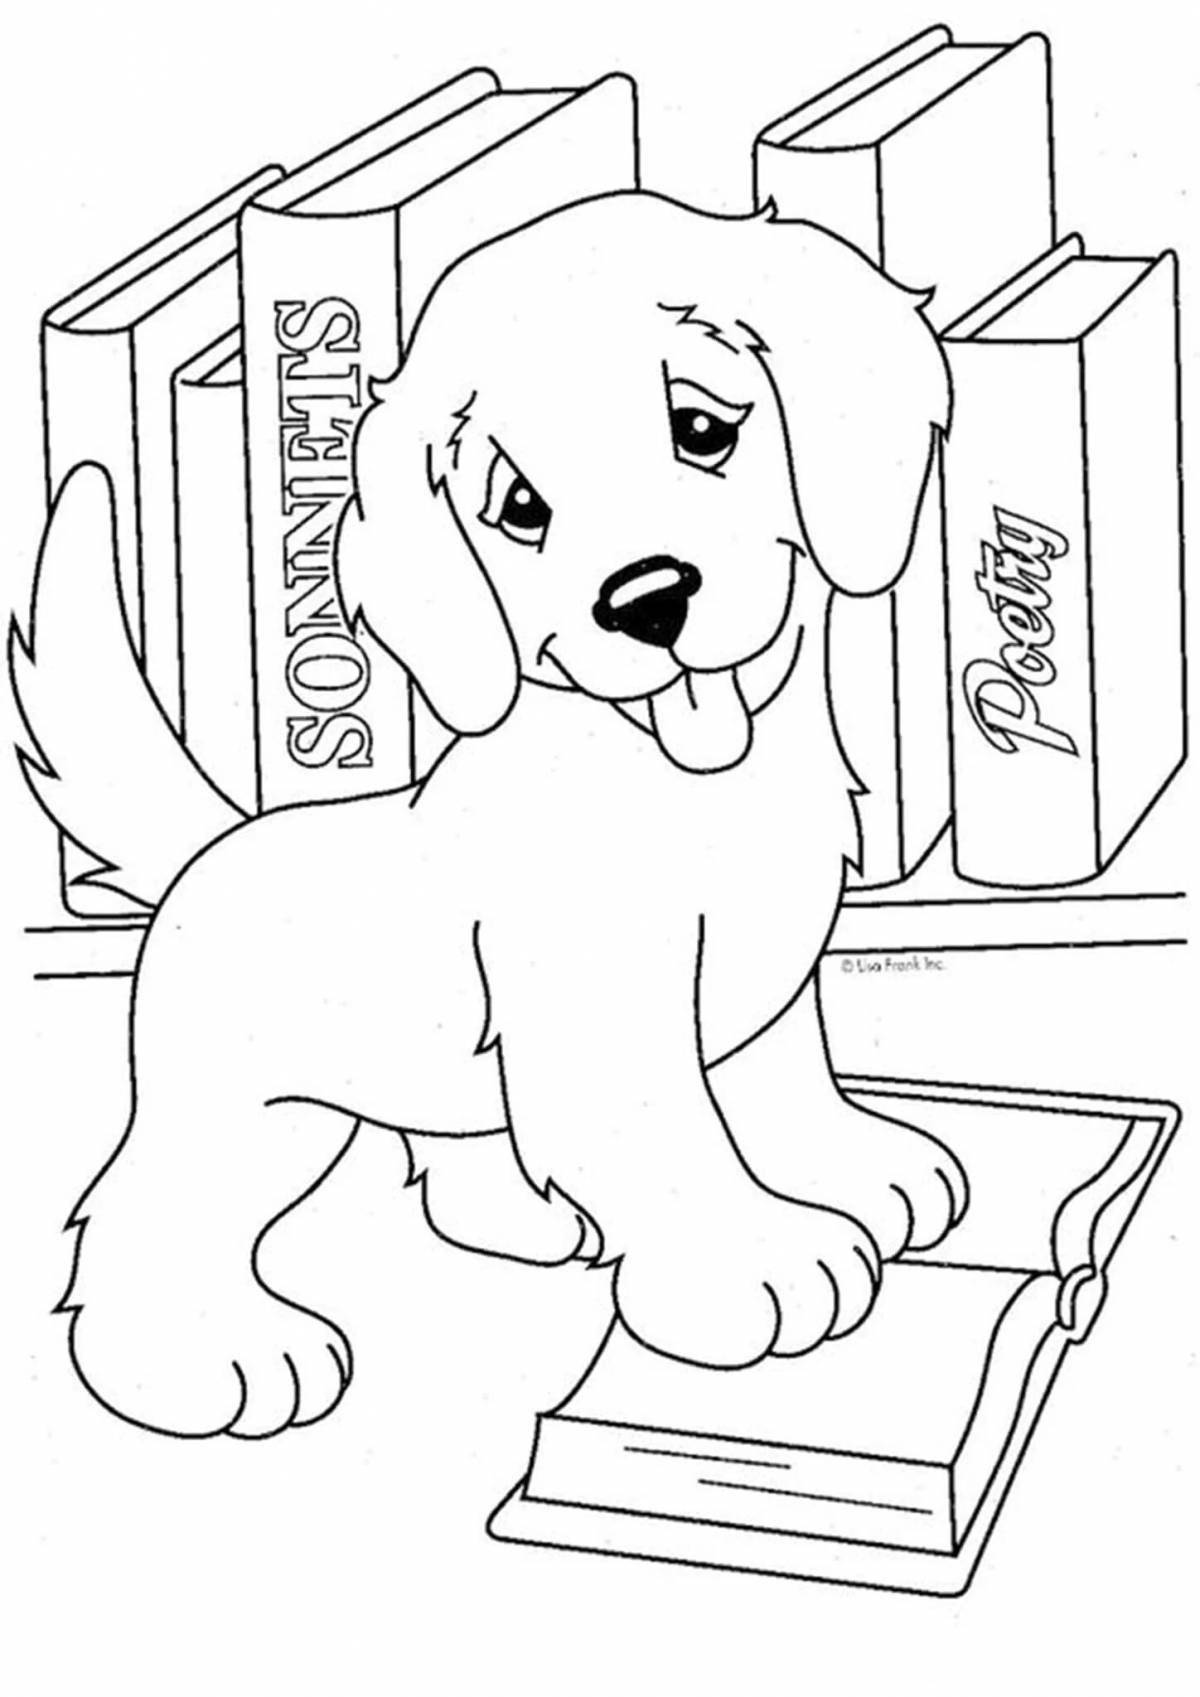 Amazing Printer Coloring Page